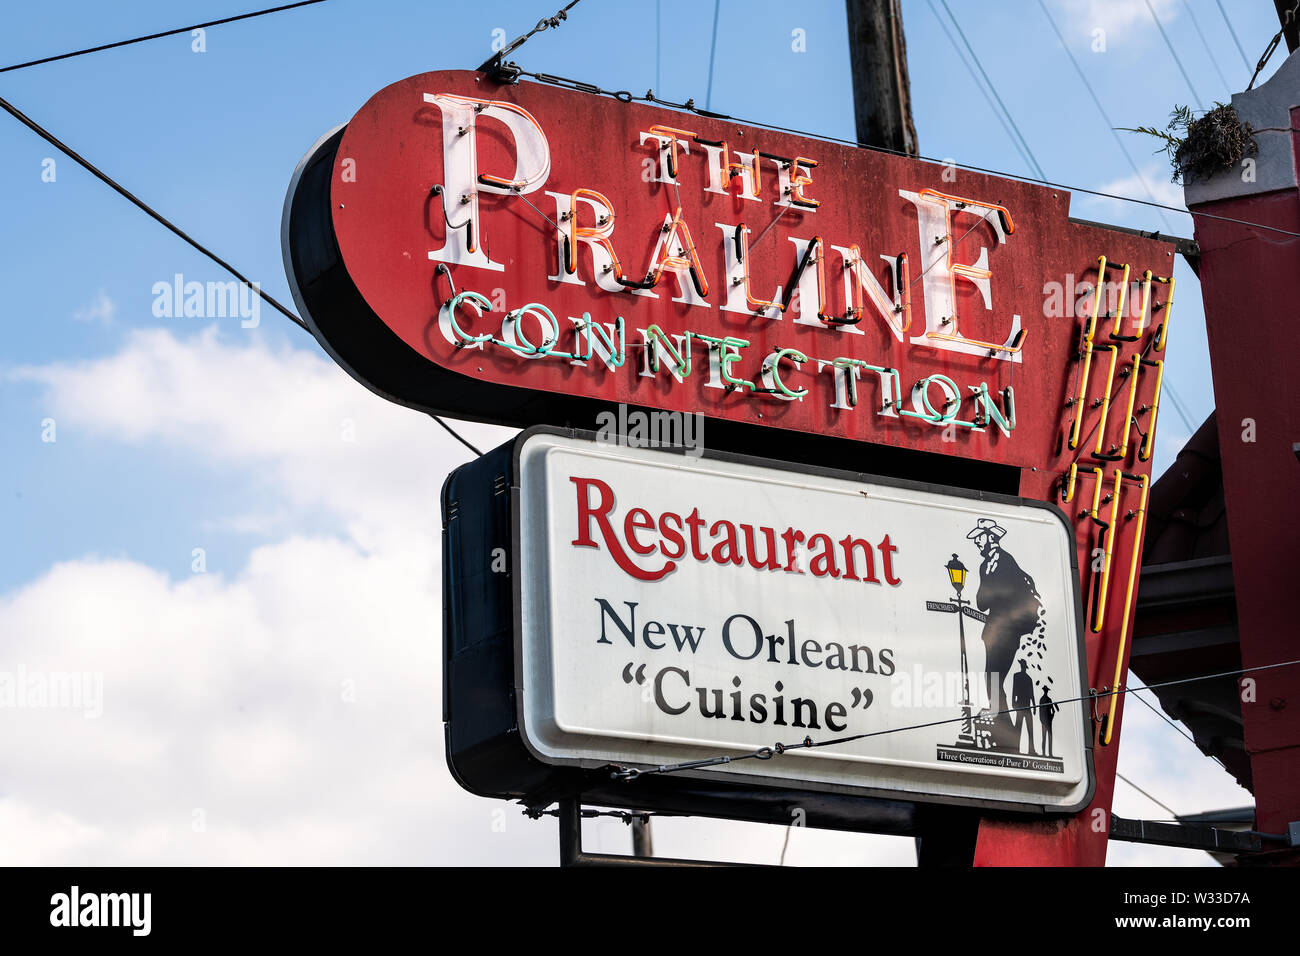 New Orleans, USA - April 23, 2018: Closeup of sign for Praline Connection restaurant or cafe in French Quarter Frenchmen street during day Stock Photo